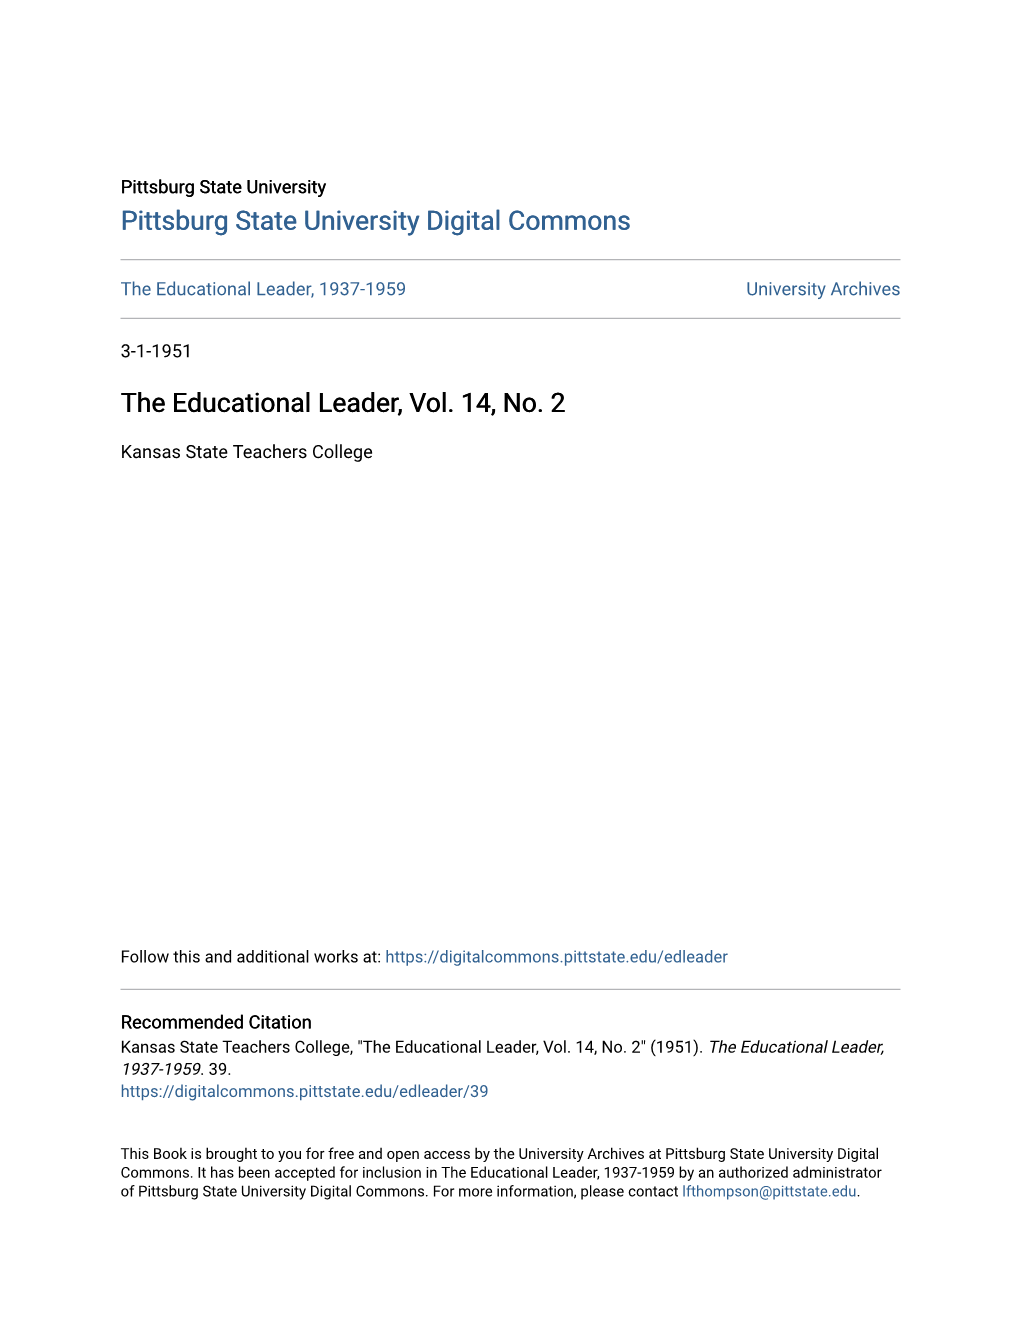 The Educational Leader, Vol. 14, No. 2